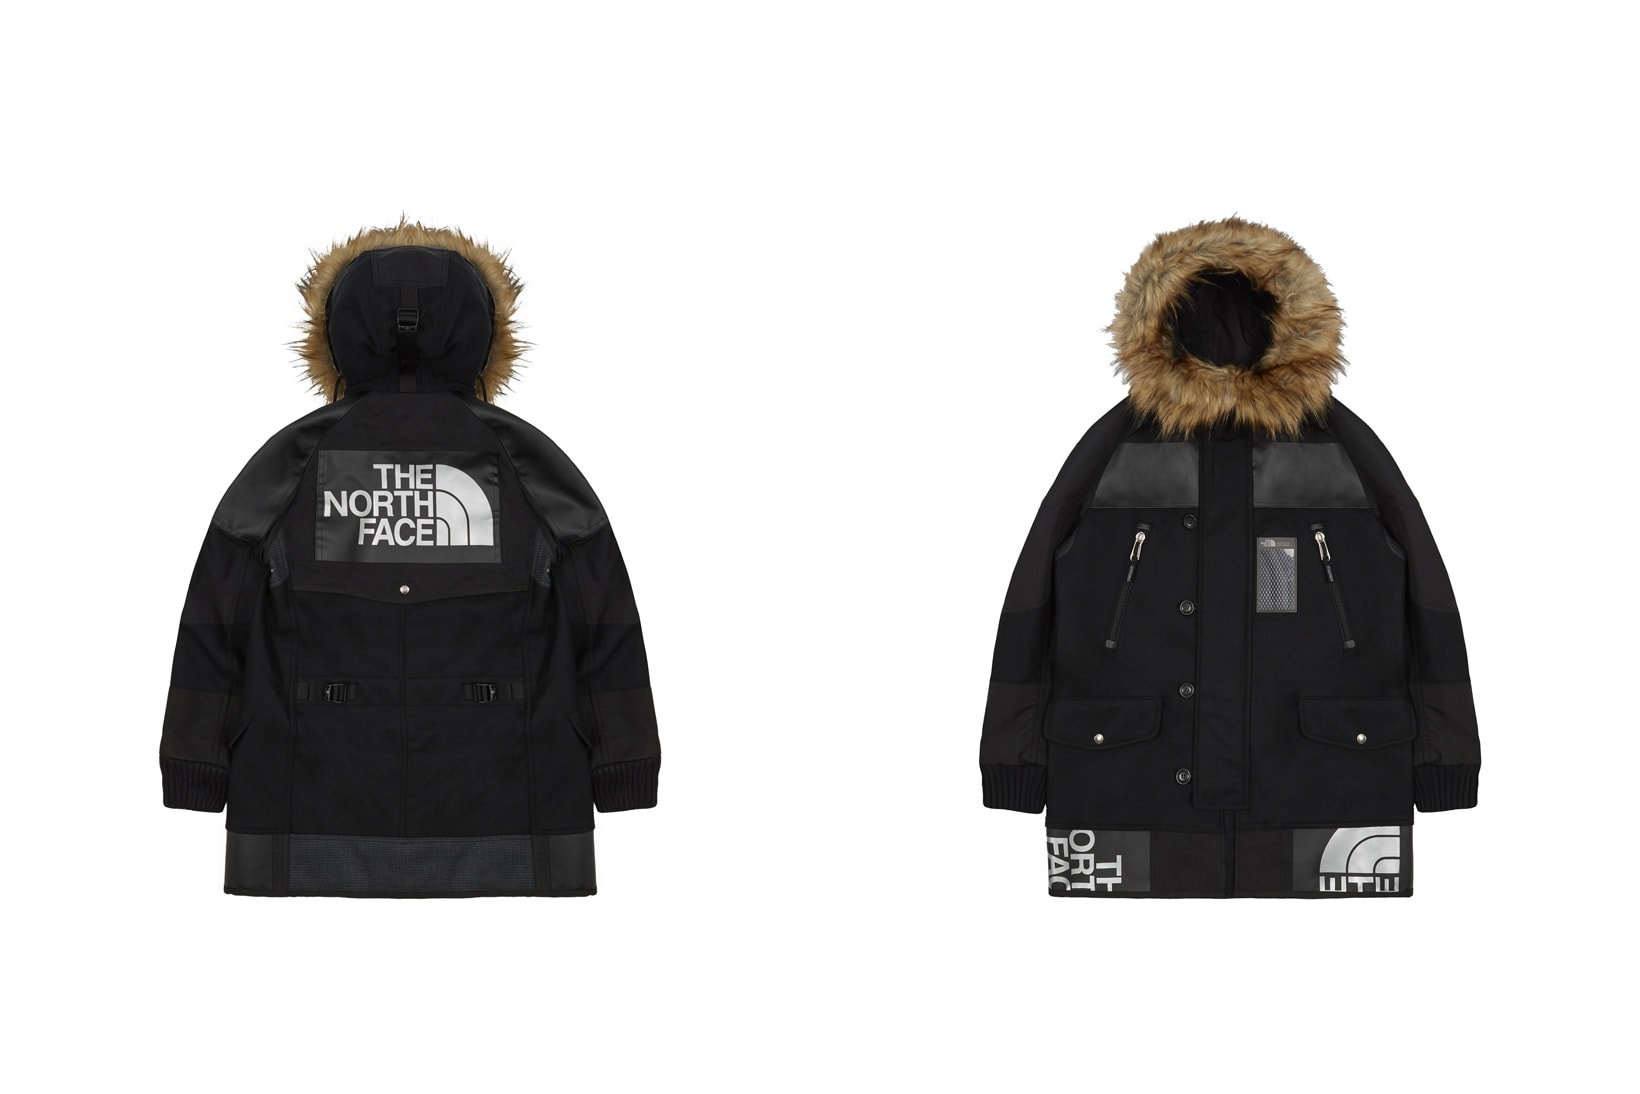 Junya Watanabe MAN The North Face Outerwear Apparel Dover Street Market London Fashion Clothing